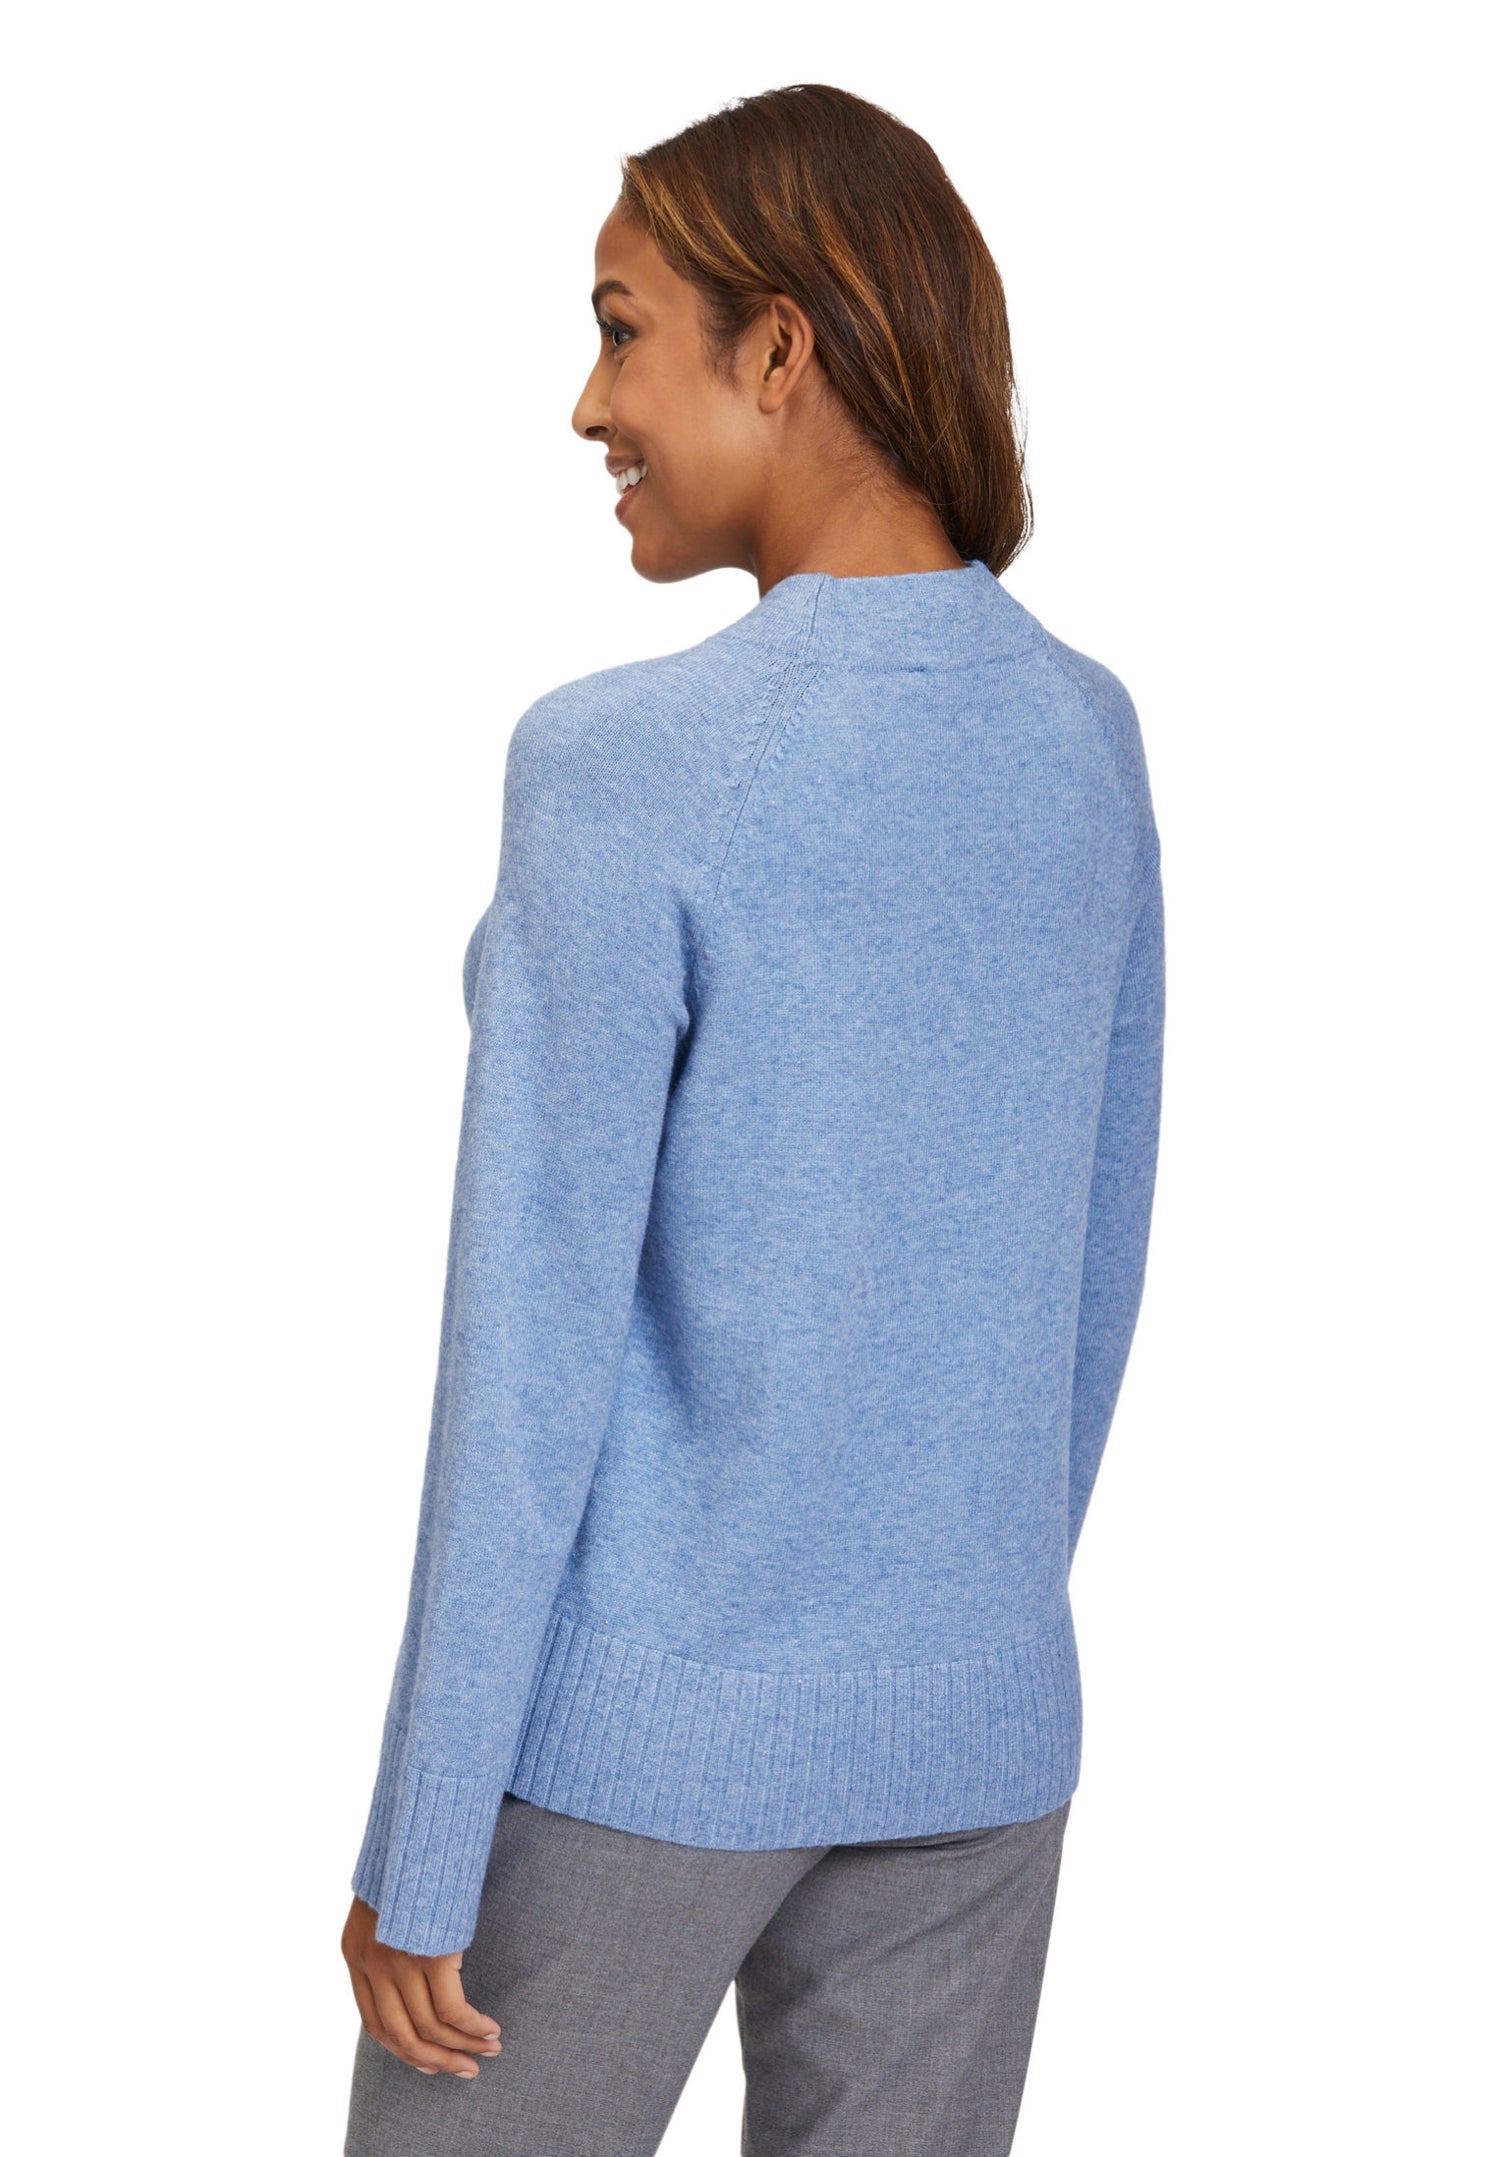 Blue Knitted Sweater_5988-1026_8713_04